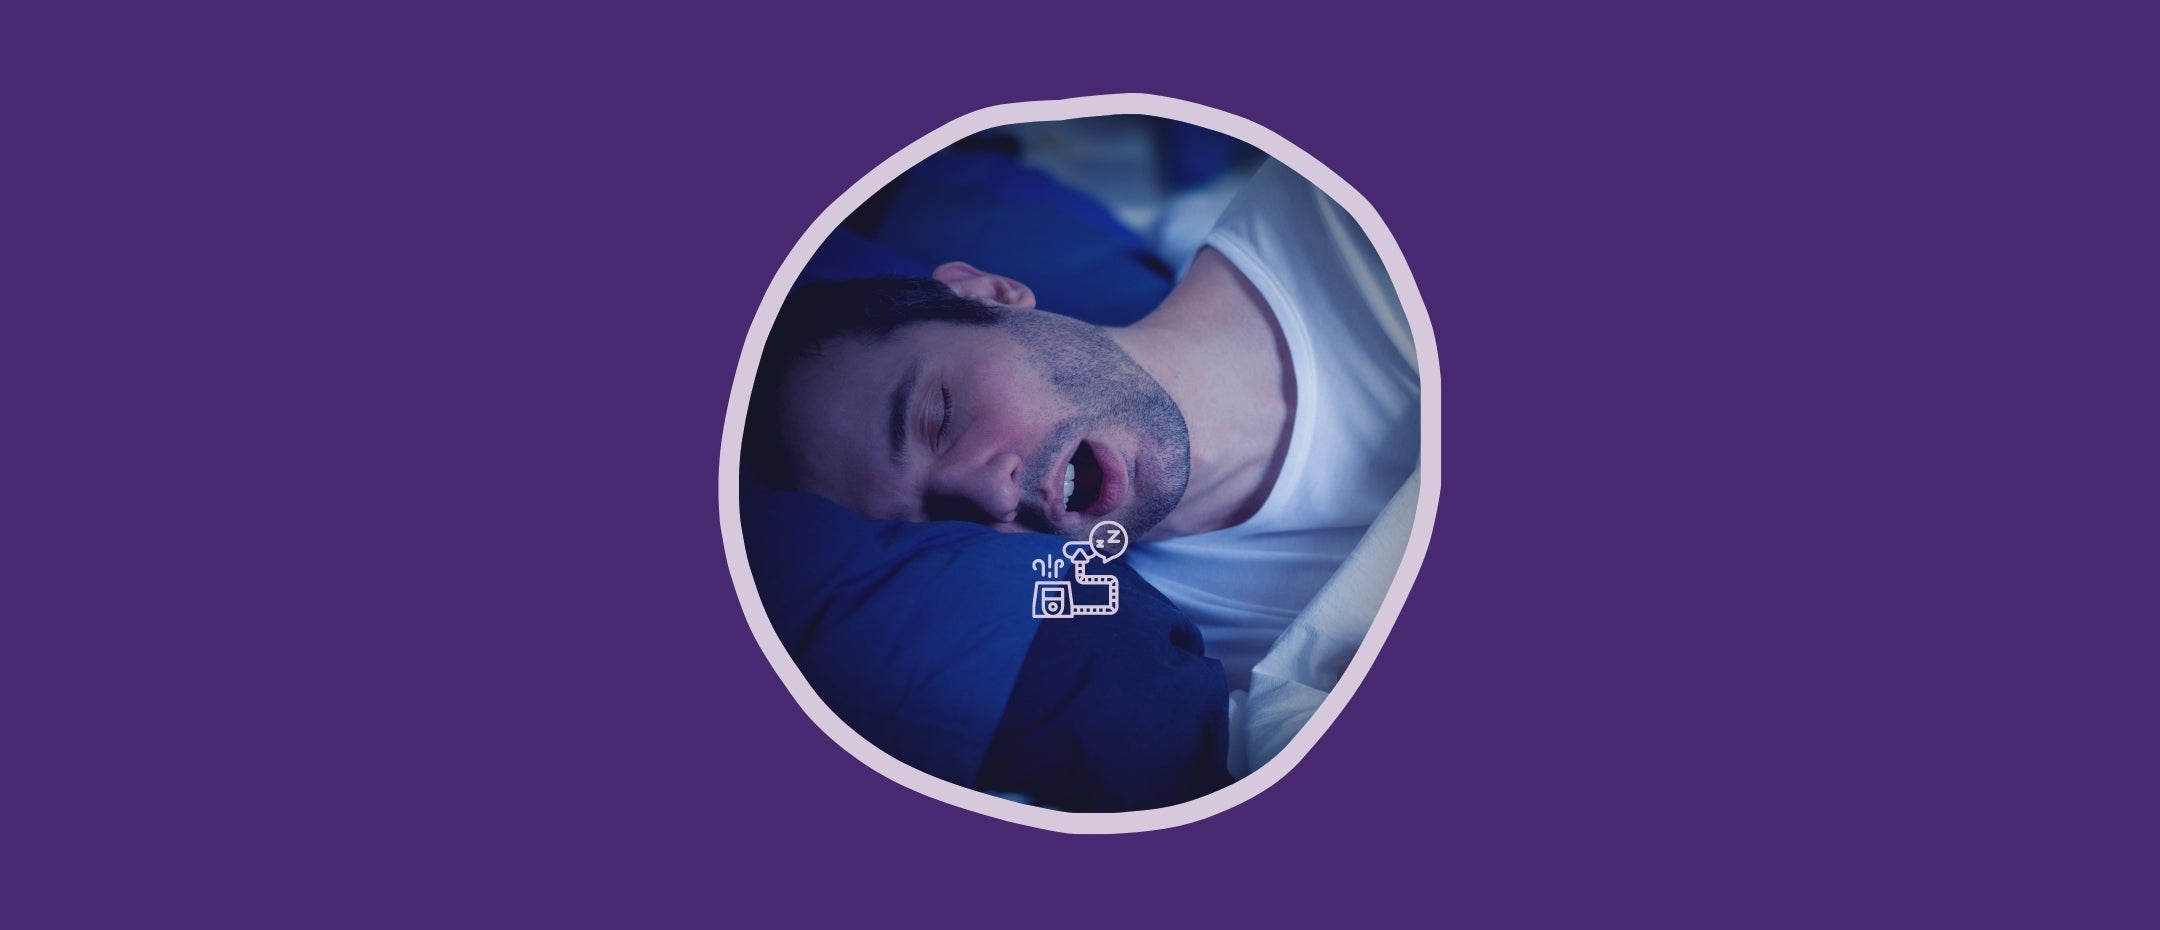 A man sleeping with his mouth open suffering from sleep apnea